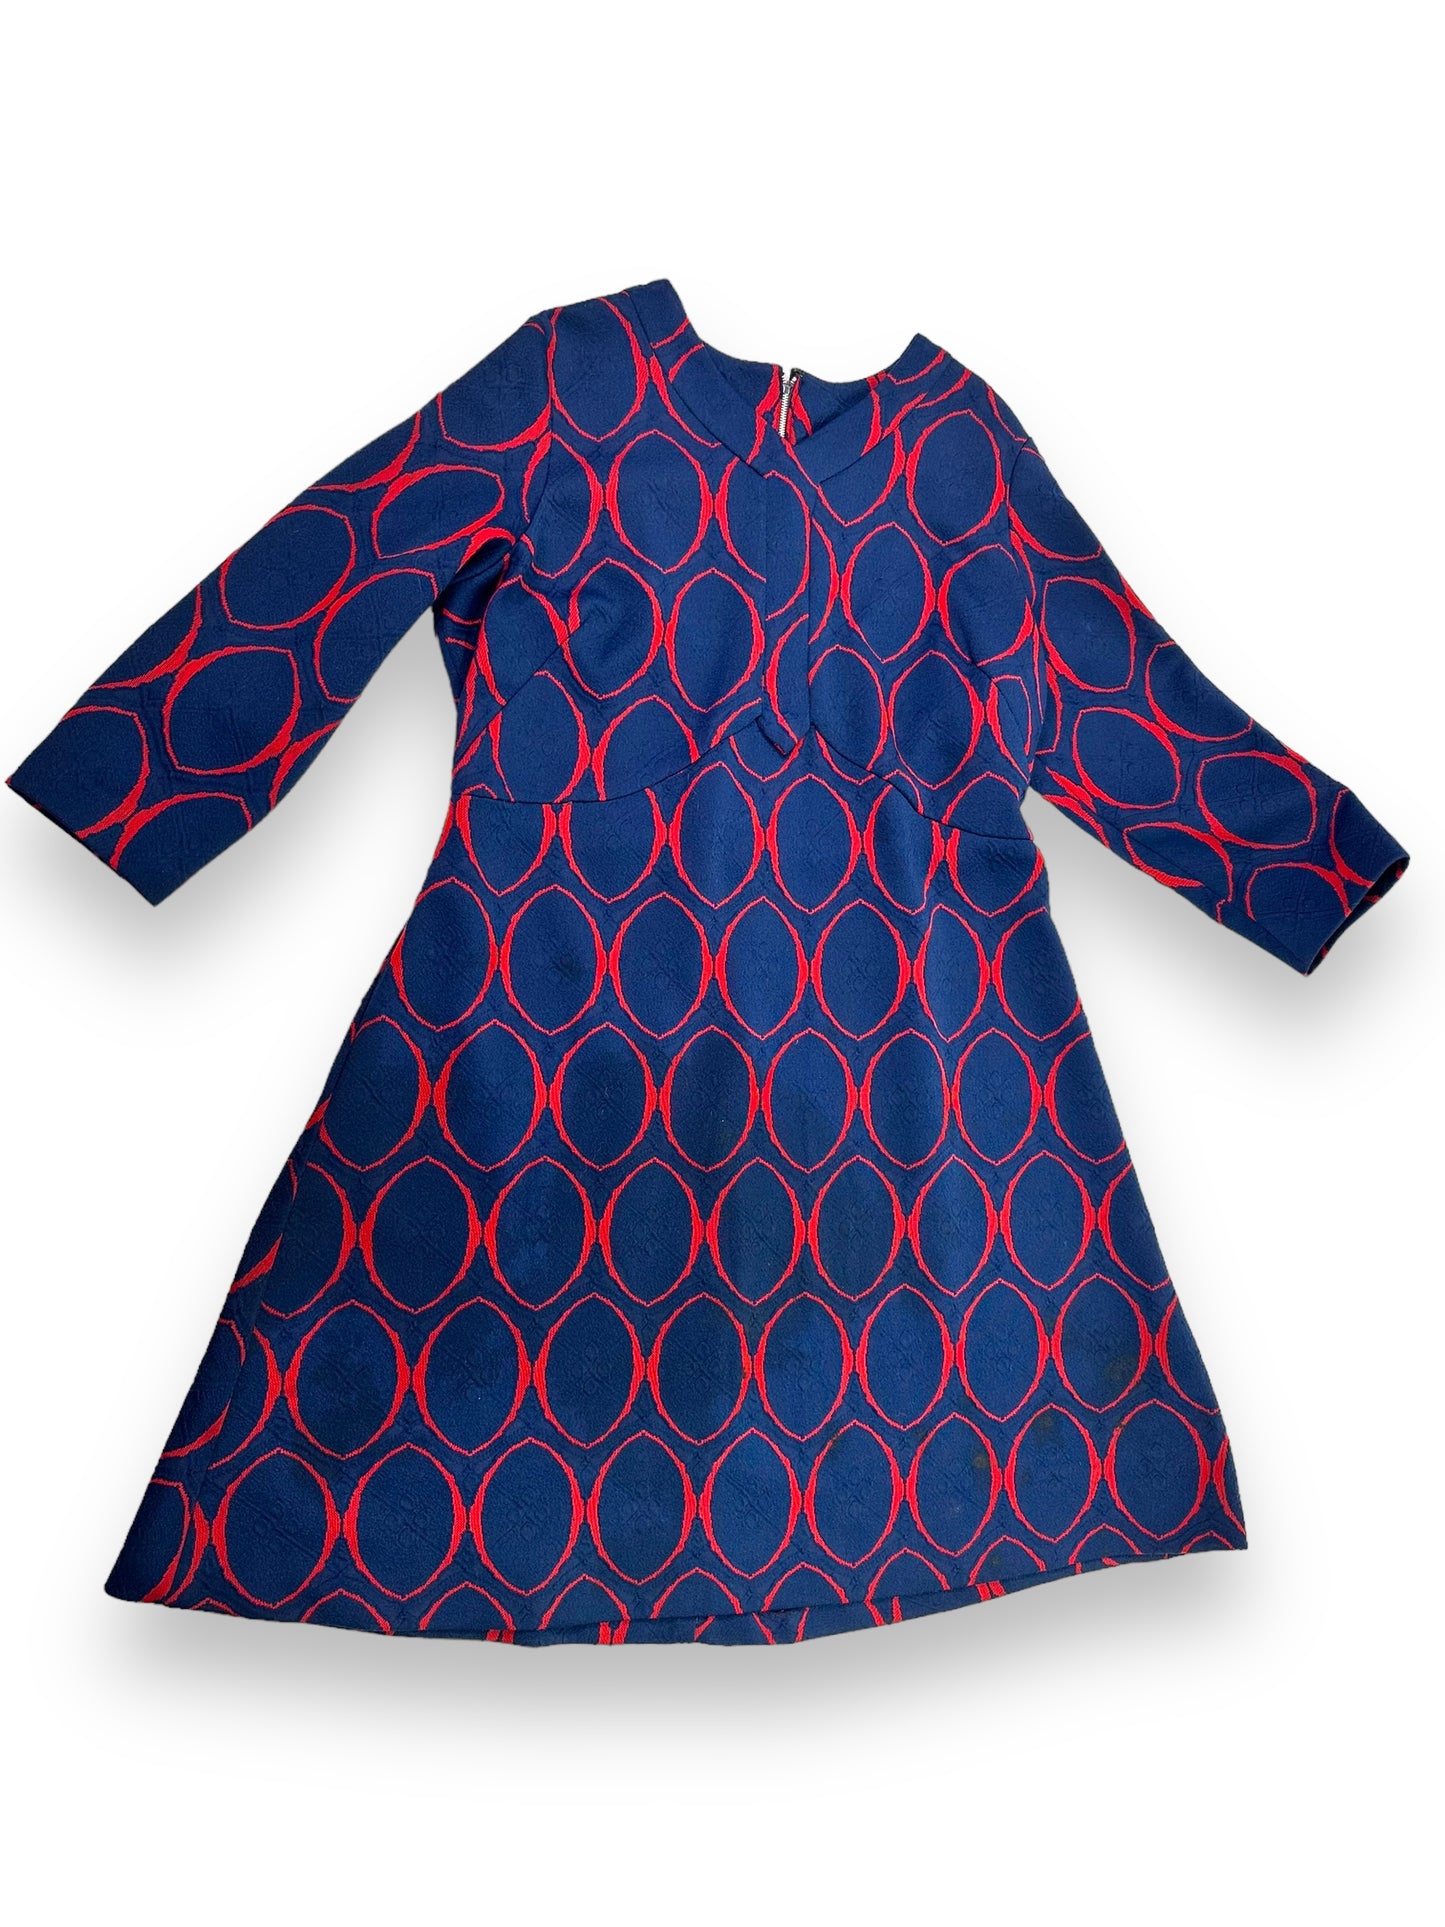 Andersonville: 1960s Navy + Red Shift Dress